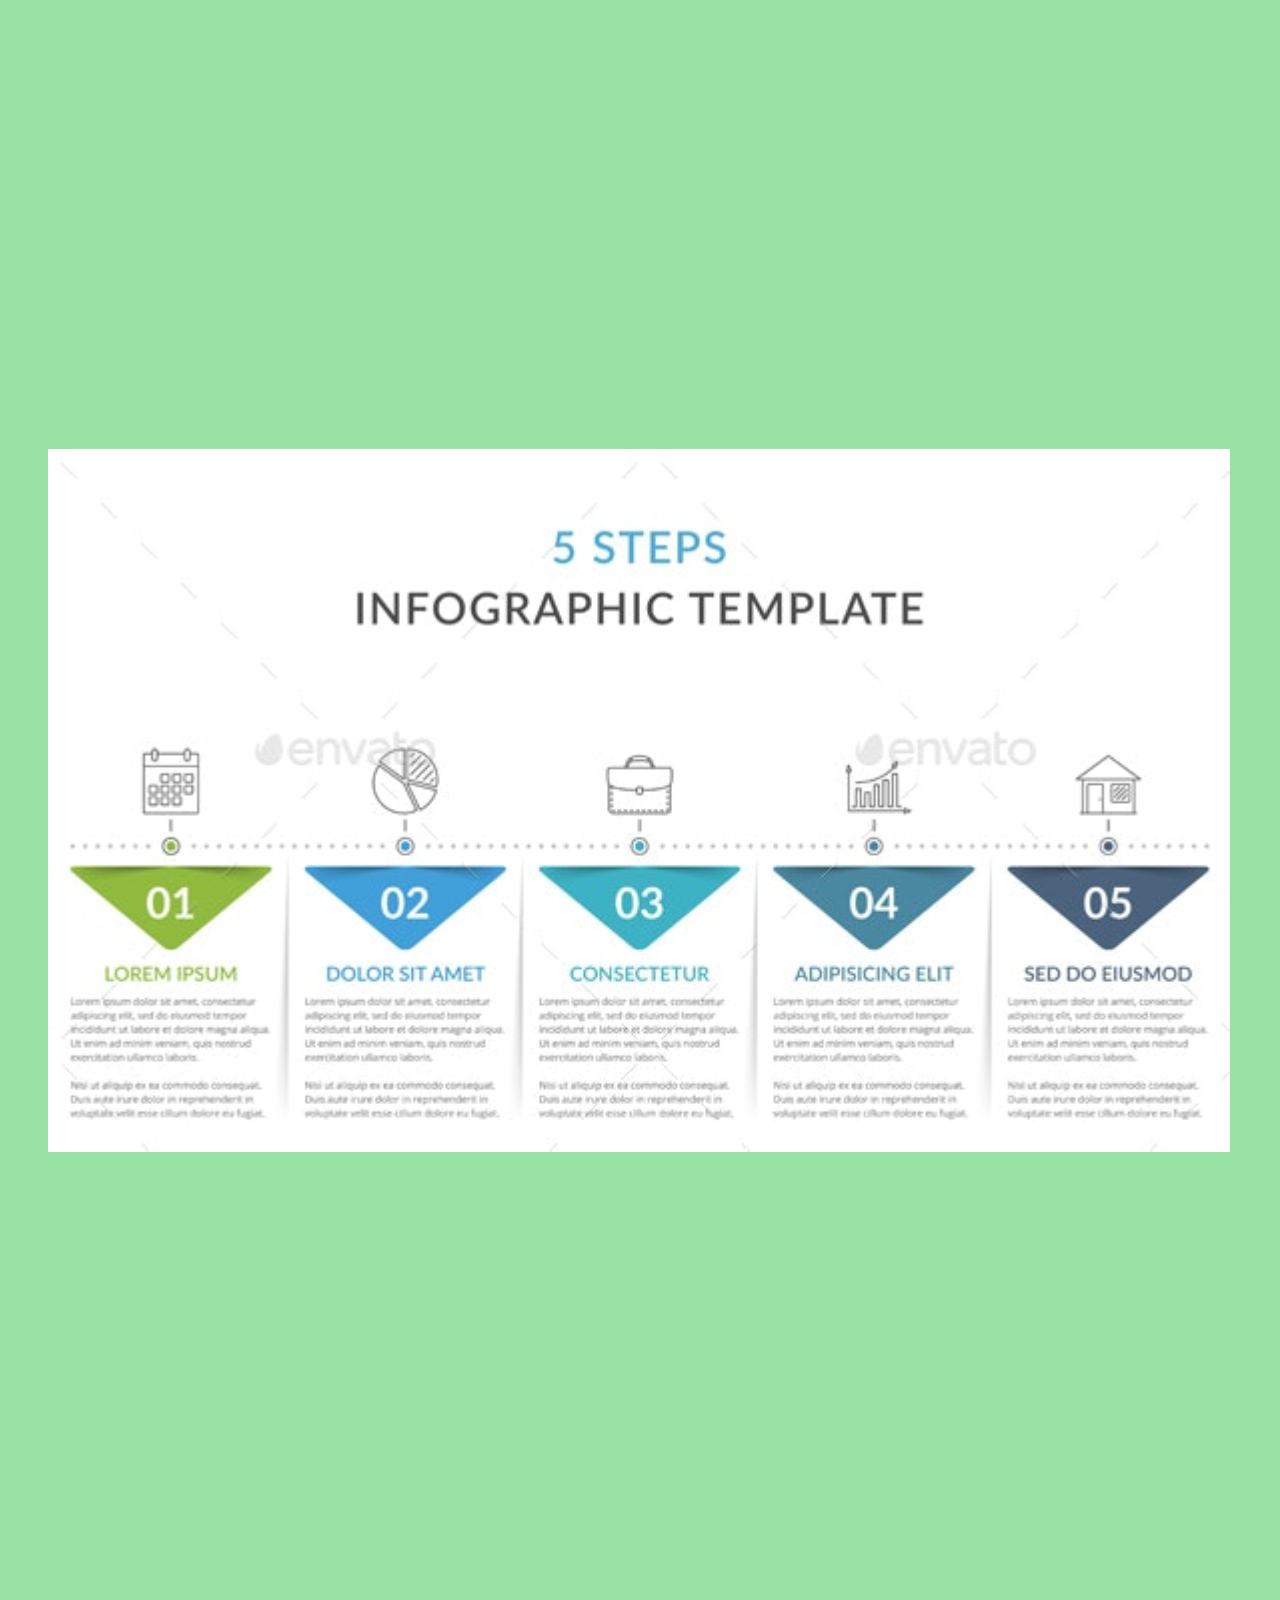 5 steps infographic template pinterest image.